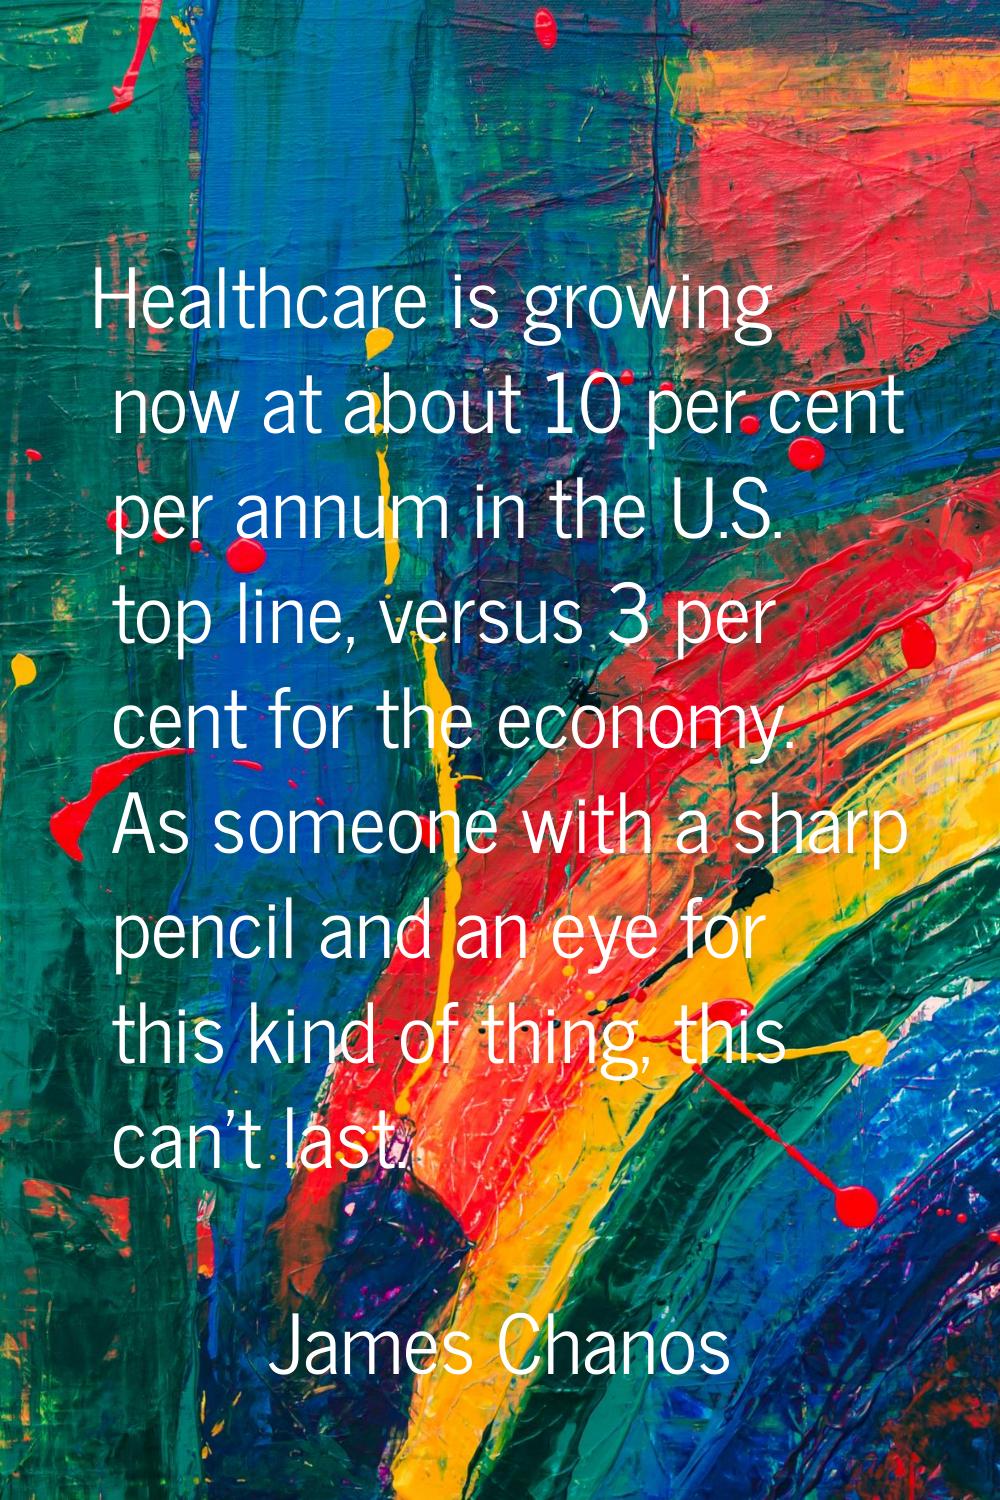 Healthcare is growing now at about 10 per cent per annum in the U.S. top line, versus 3 per cent fo